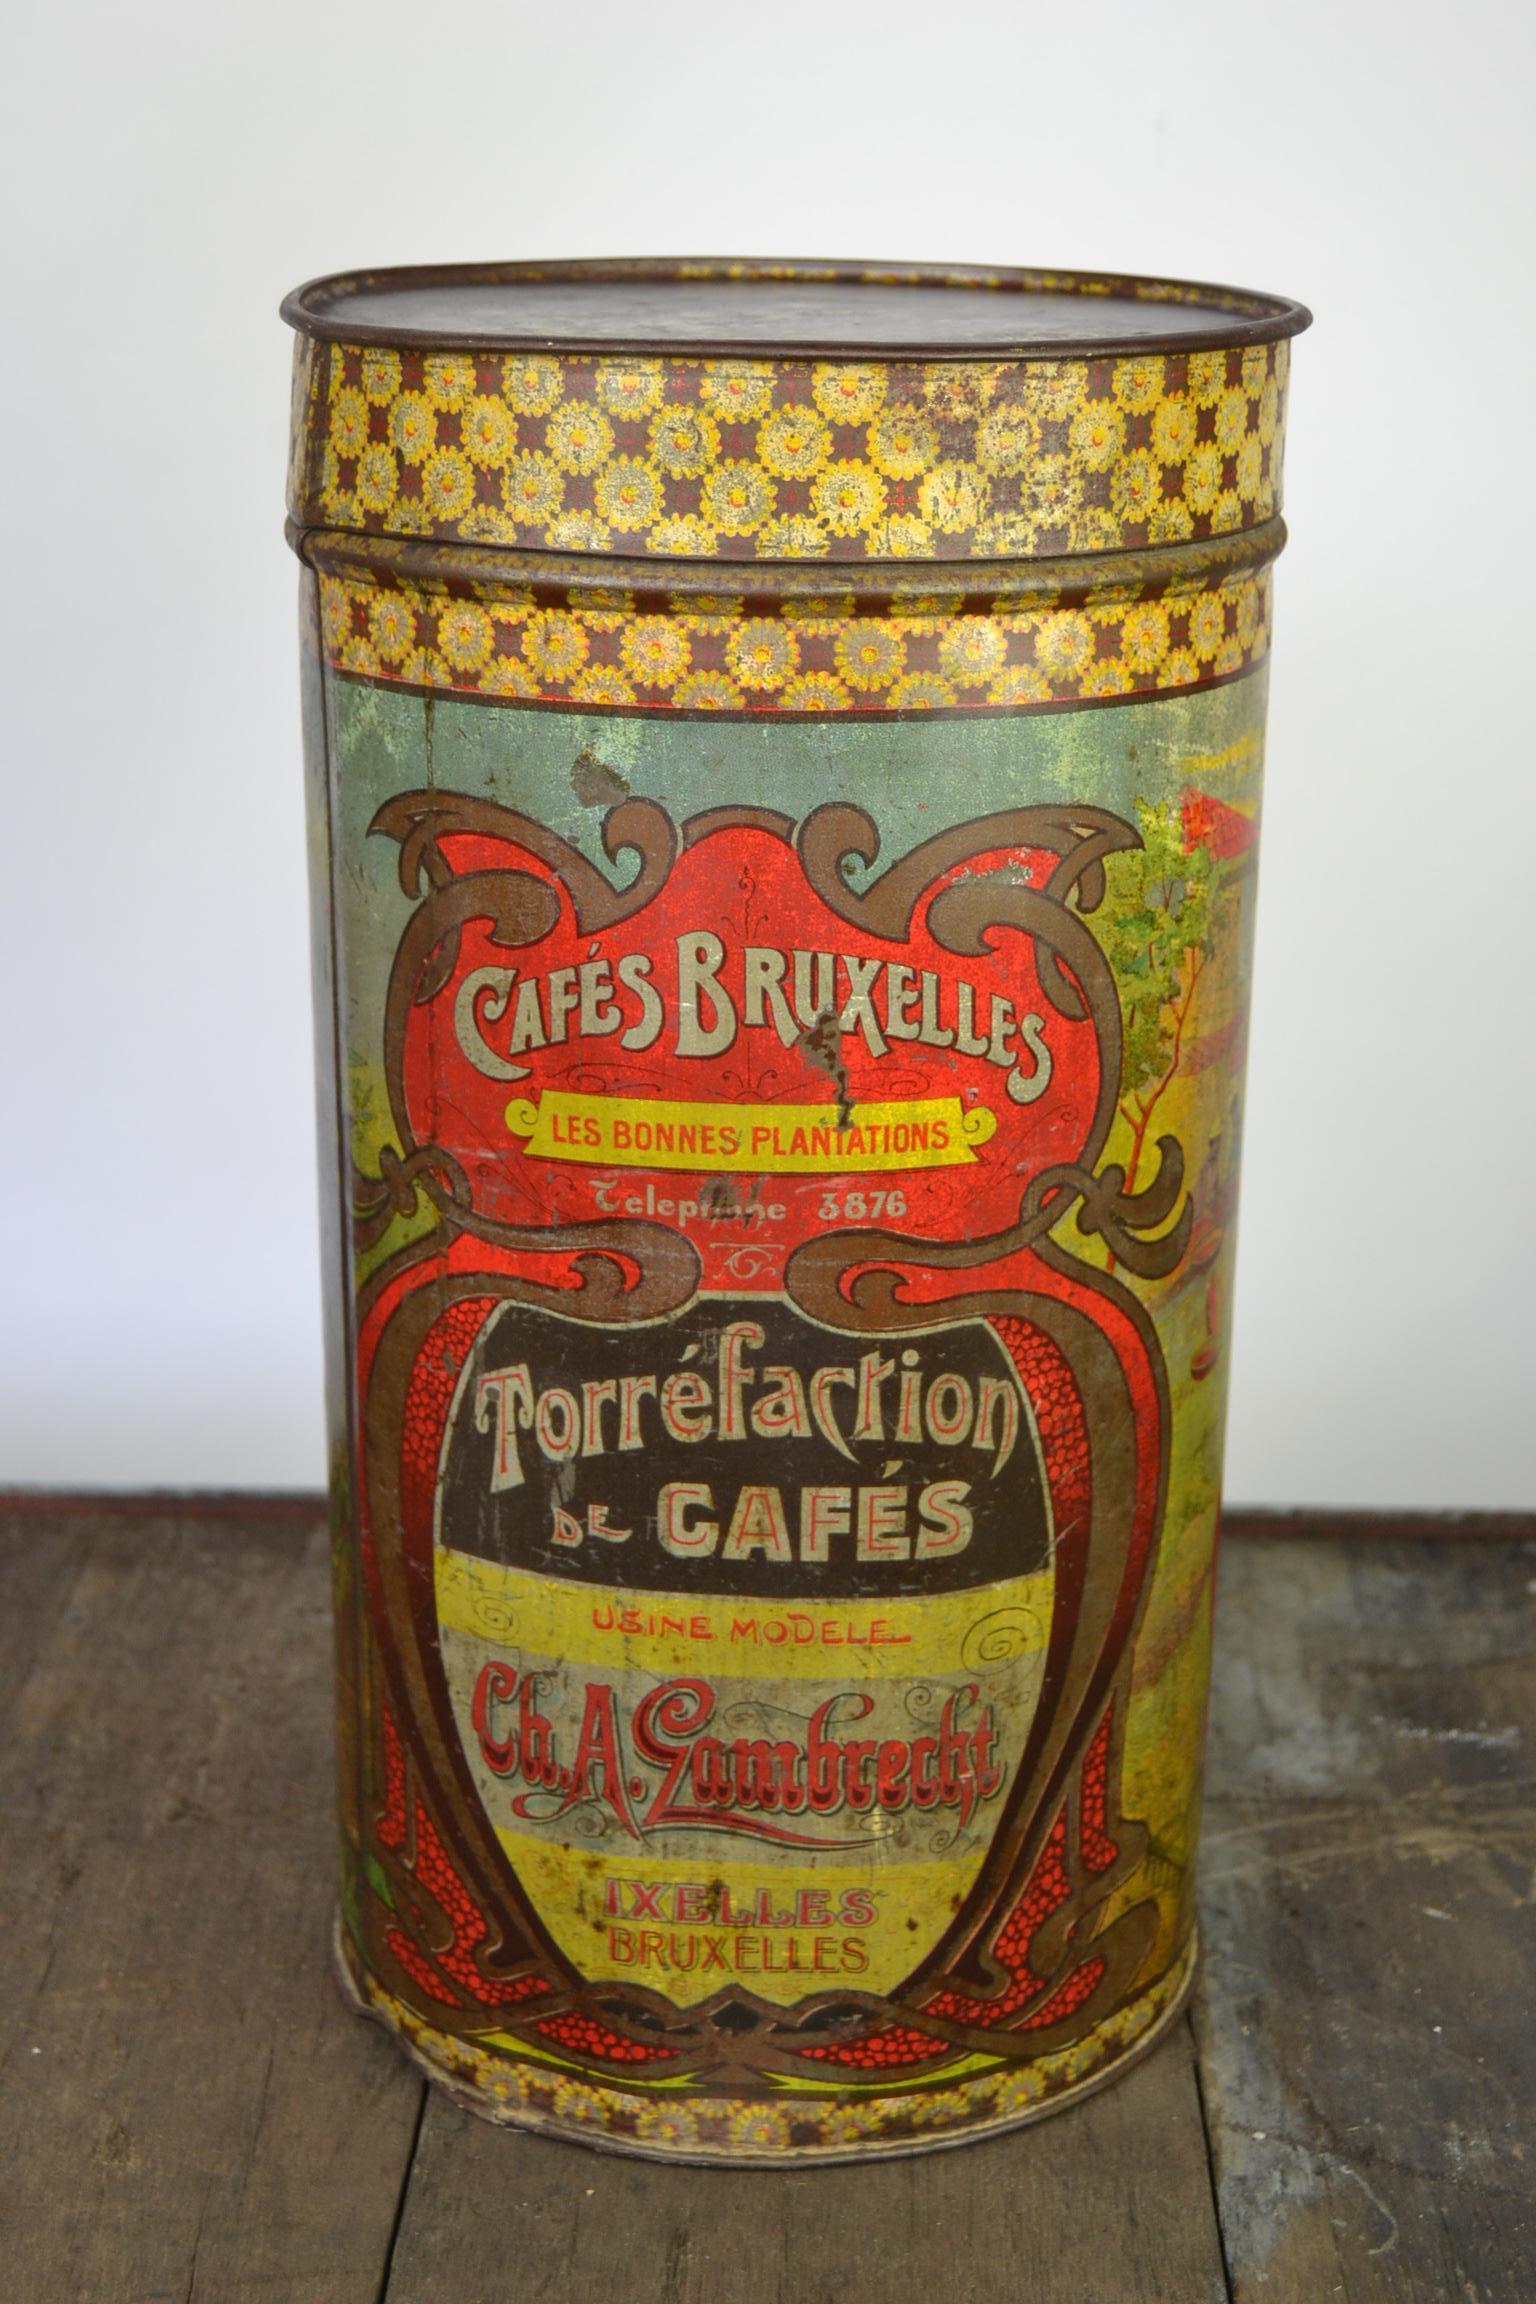 Antique Coffee Tin. 
A large tube shaped metal coffee box from Brussels Belgium. 
This coffee container dates from the Art Nouveau - Jugendstill Period, 1890-1900, 
and was made for the Coffee Company Ch. A. Lambrecht - Brussels - Bruxelles -